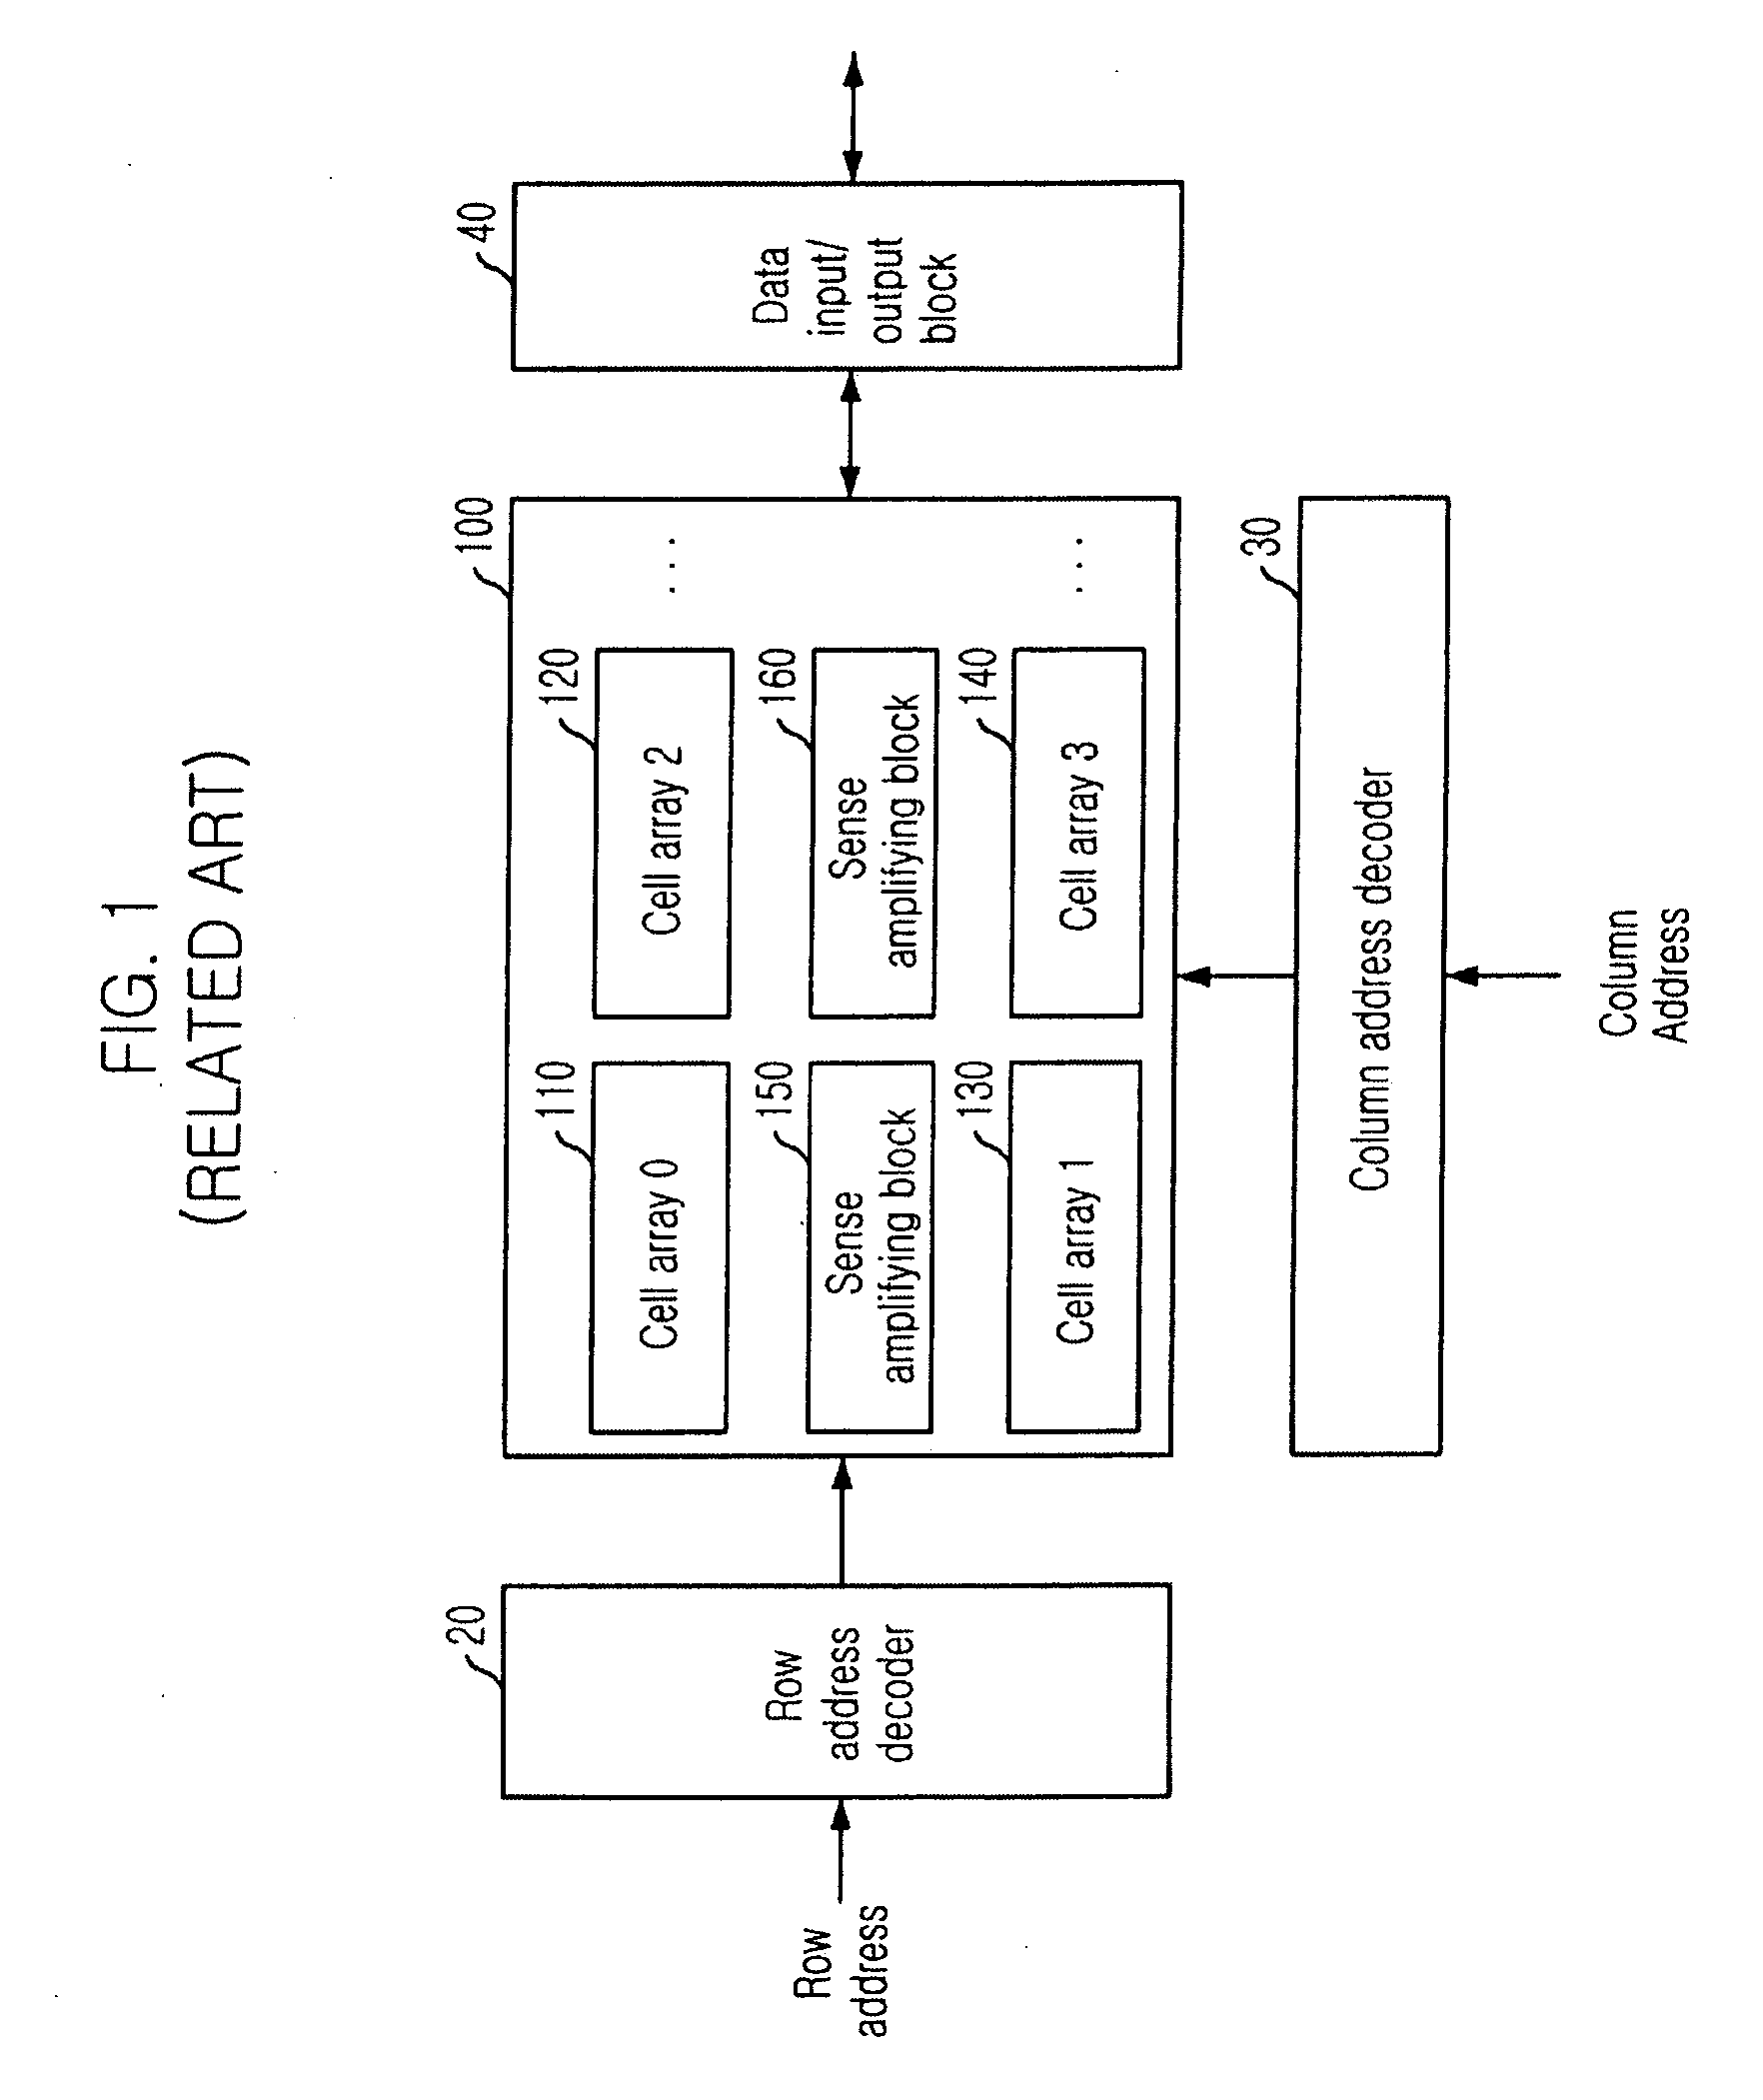 Semiconductor memory device for low voltage